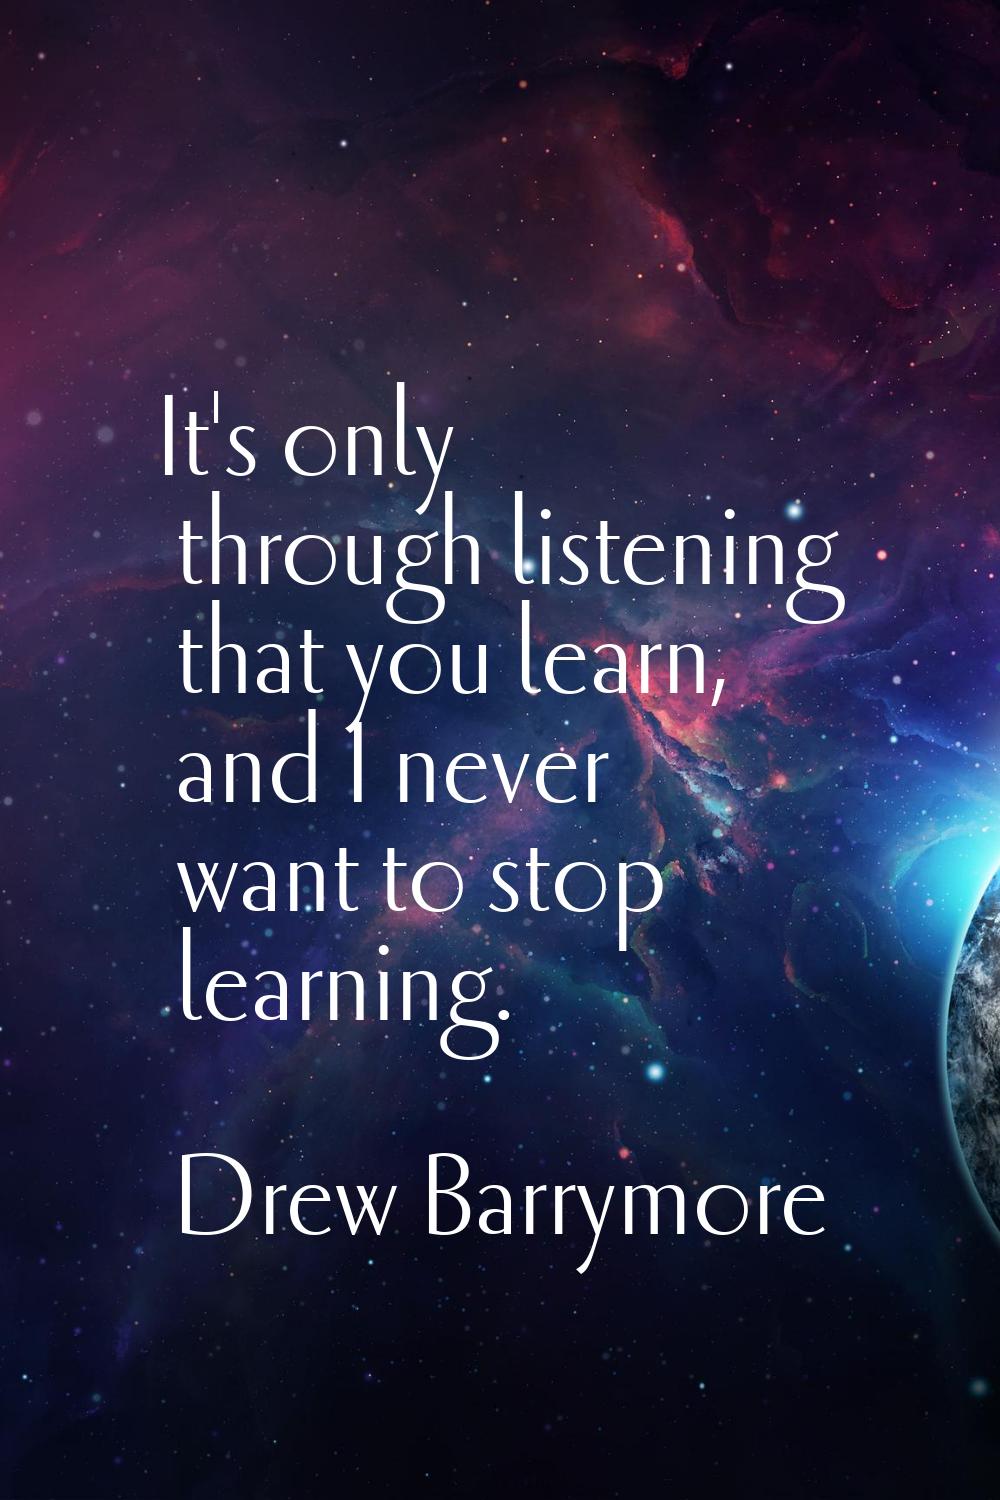 It's only through listening that you learn, and I never want to stop learning.